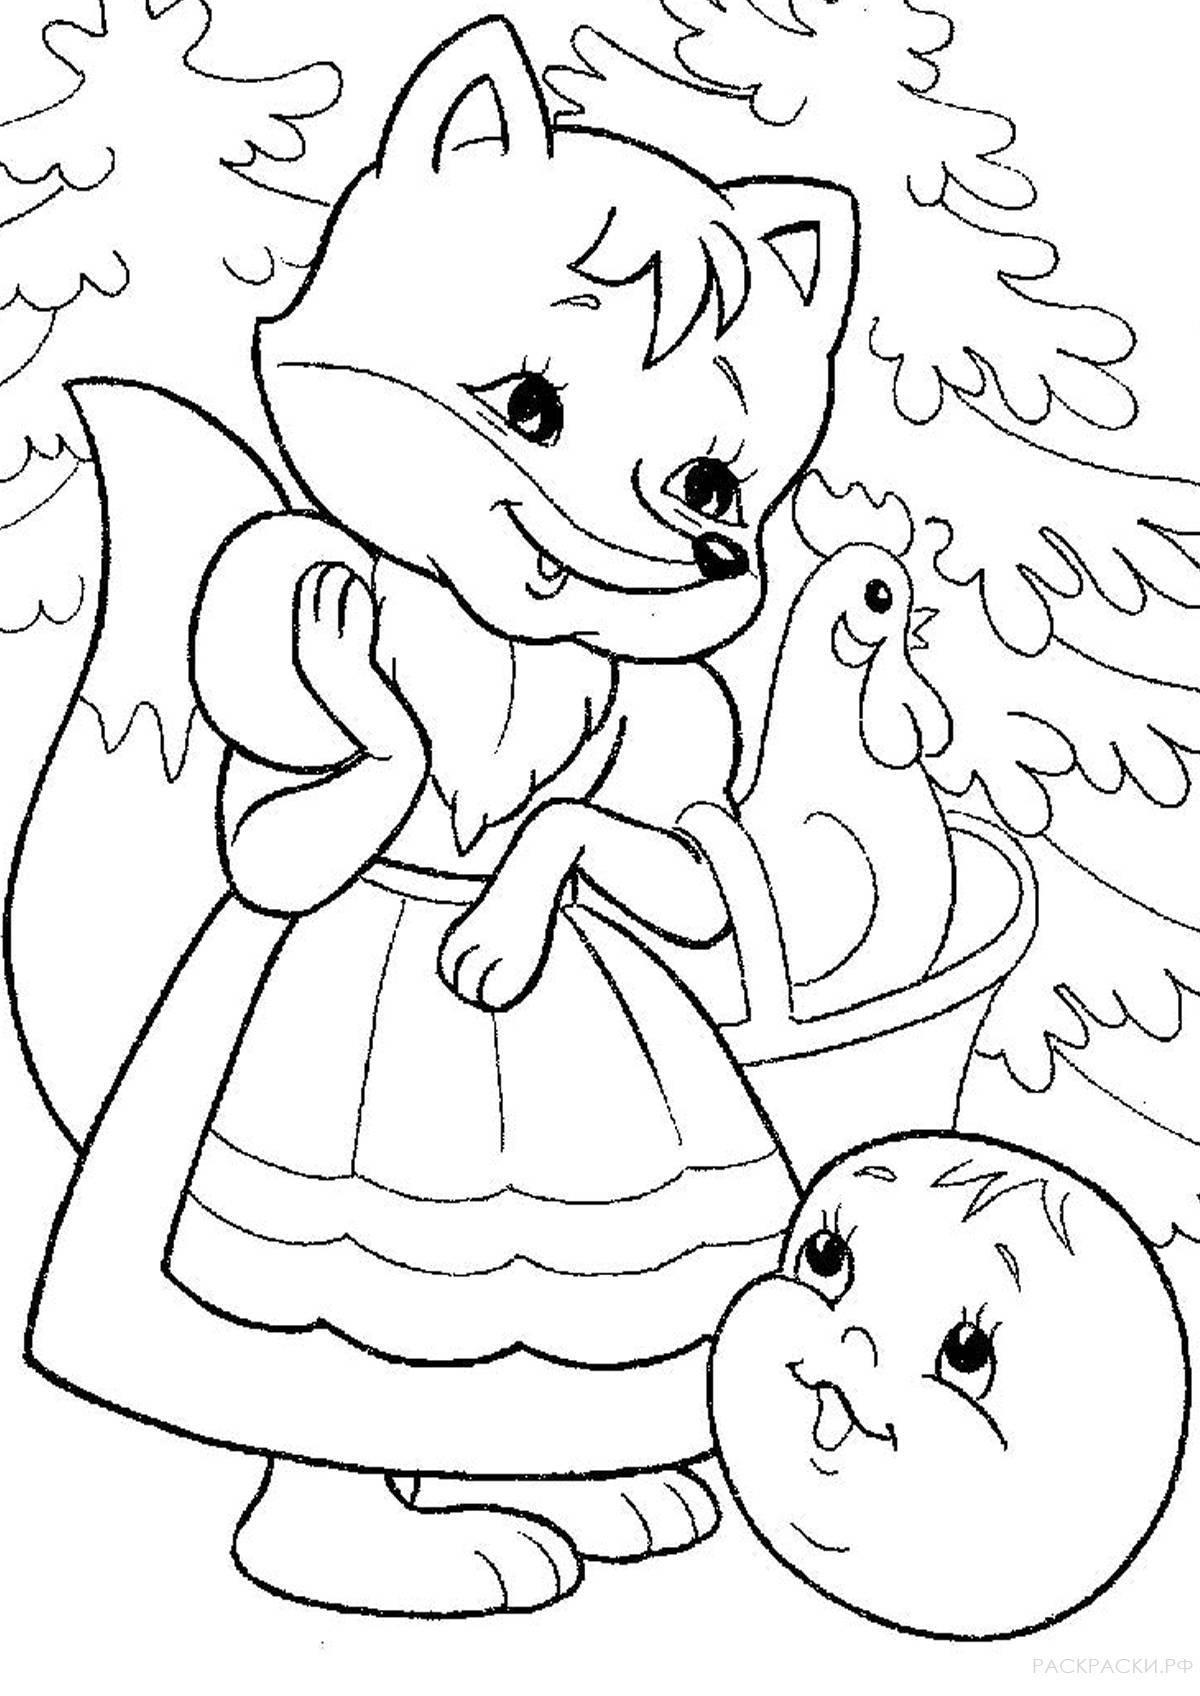 Fun fairy tale coloring pages